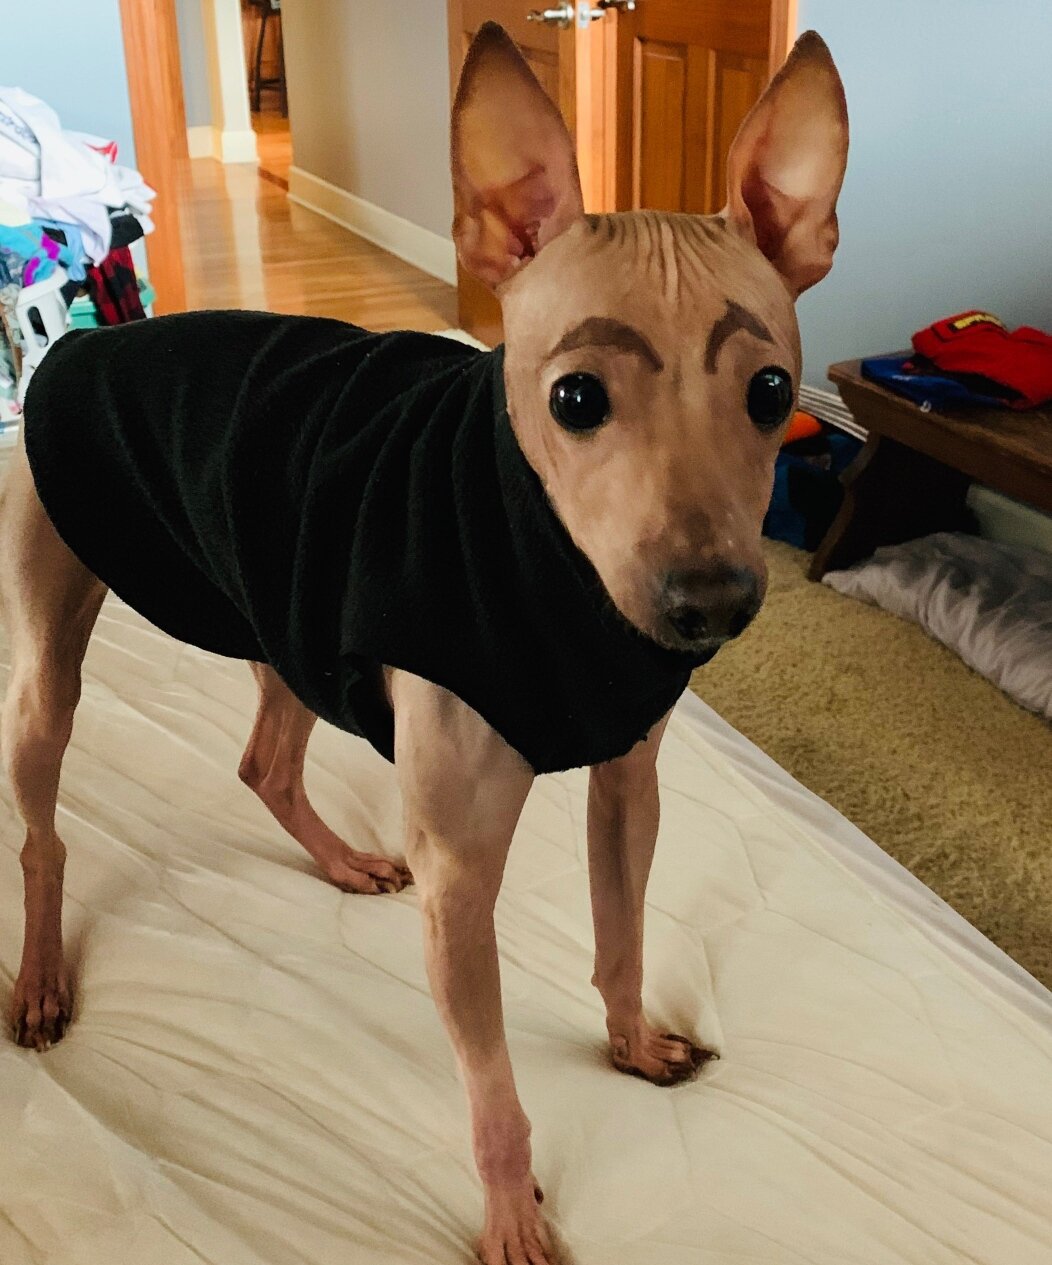 Father Stephen Jones’s dog, Trebby, is an American hairless terrier. He has no fur, including eyebrows, so the Jones children occasionally draw expressive eyebrows on him using water-soluble, nontoxic ink.